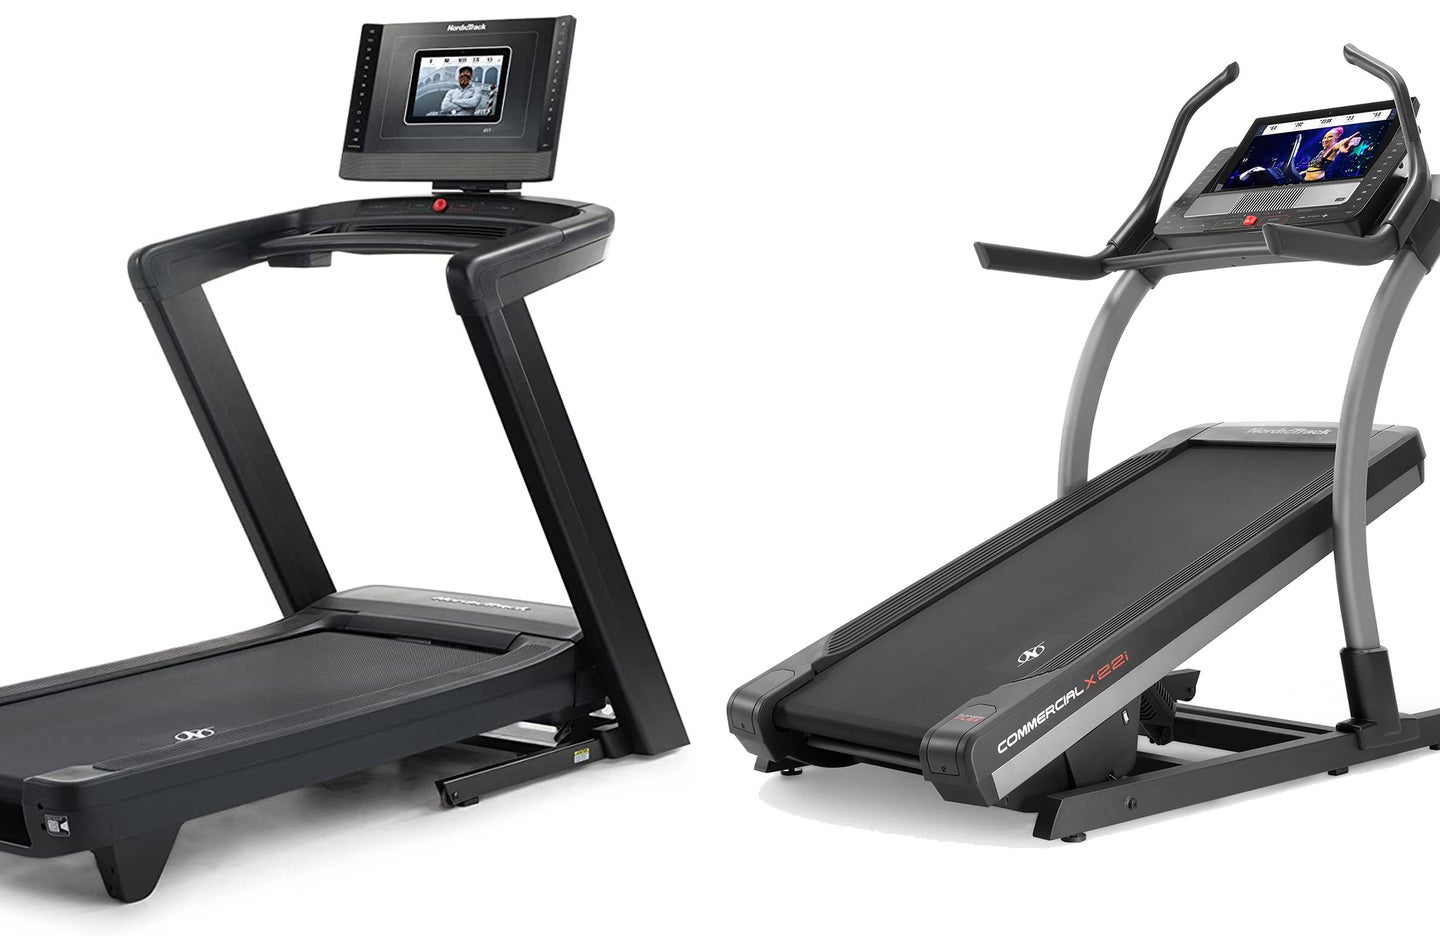 Two NordicTrack treadmills next to each other on a plain background.